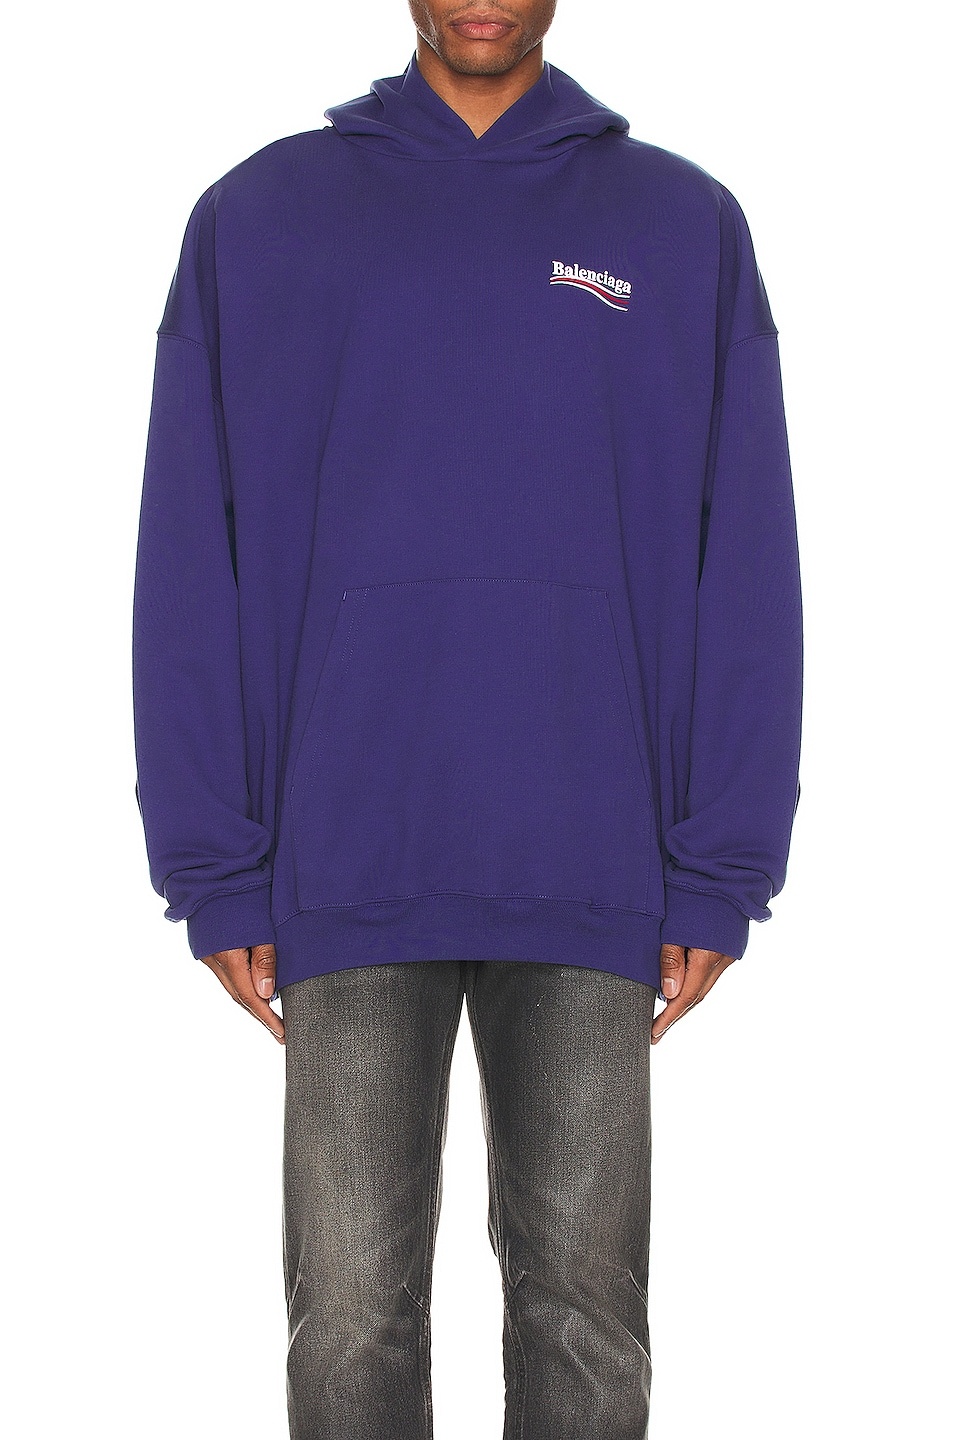 Campaign Large Fit Hoodie - 4